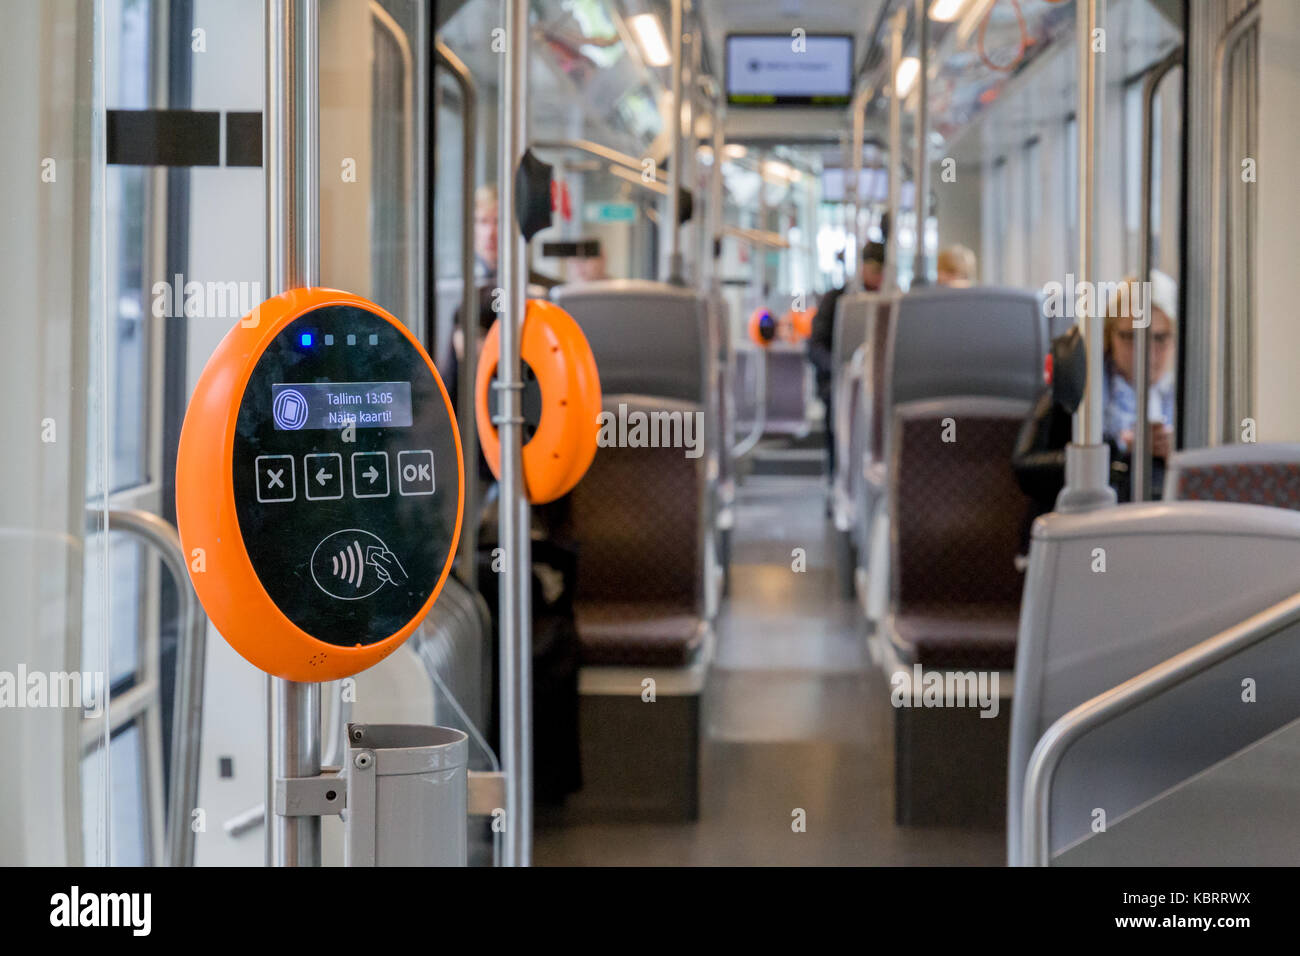 Orange modern magnetic ticket validator with tram and people in background Stock Photo